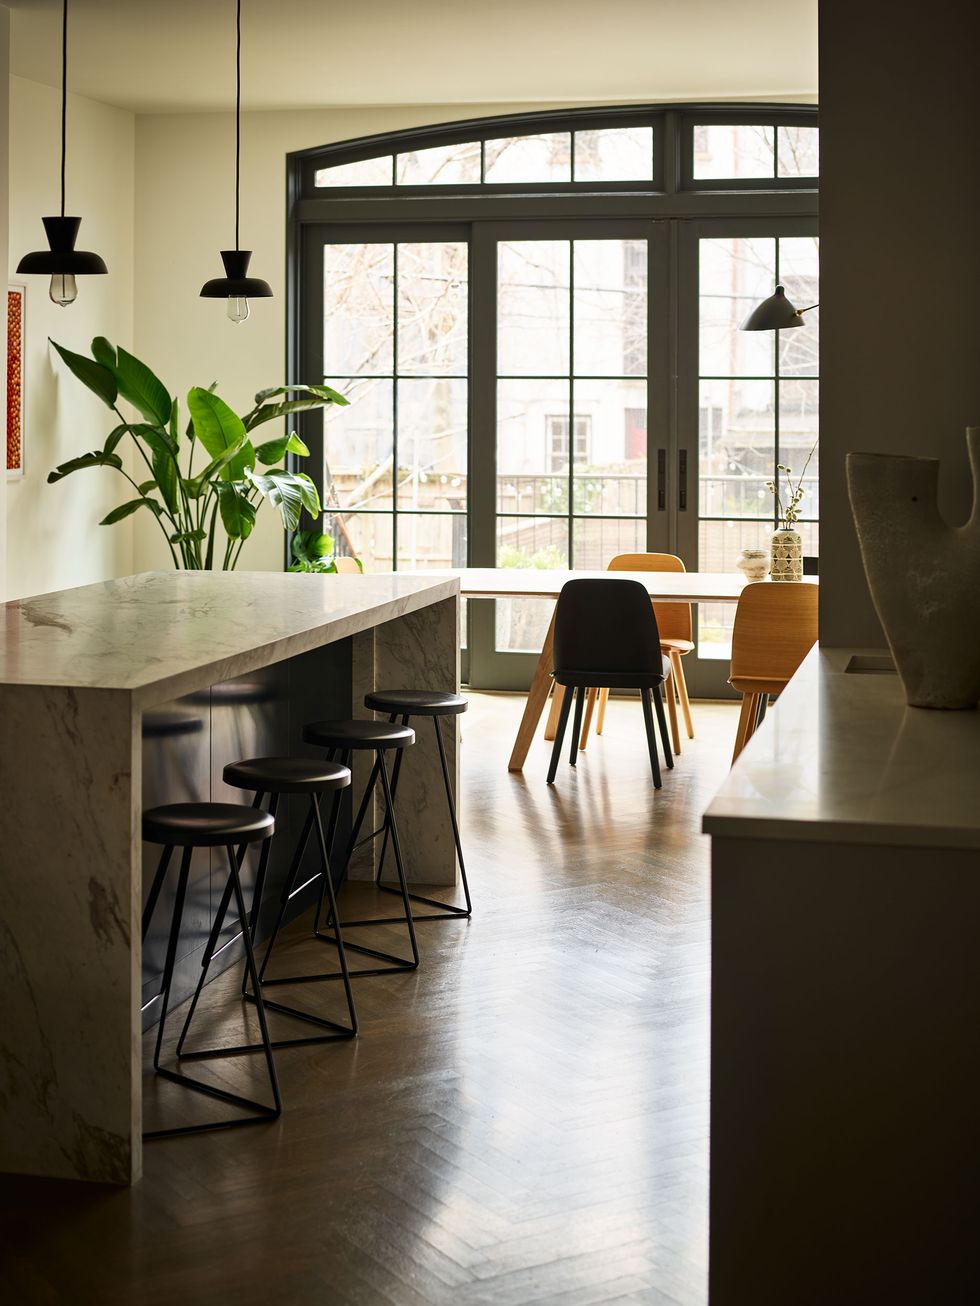 sliding glass doors let line into a kitchen that has a dining table and wooden chairs, a marble counter with four backless stools and two pendants above, a wood floor, and a large potted palm in the corner